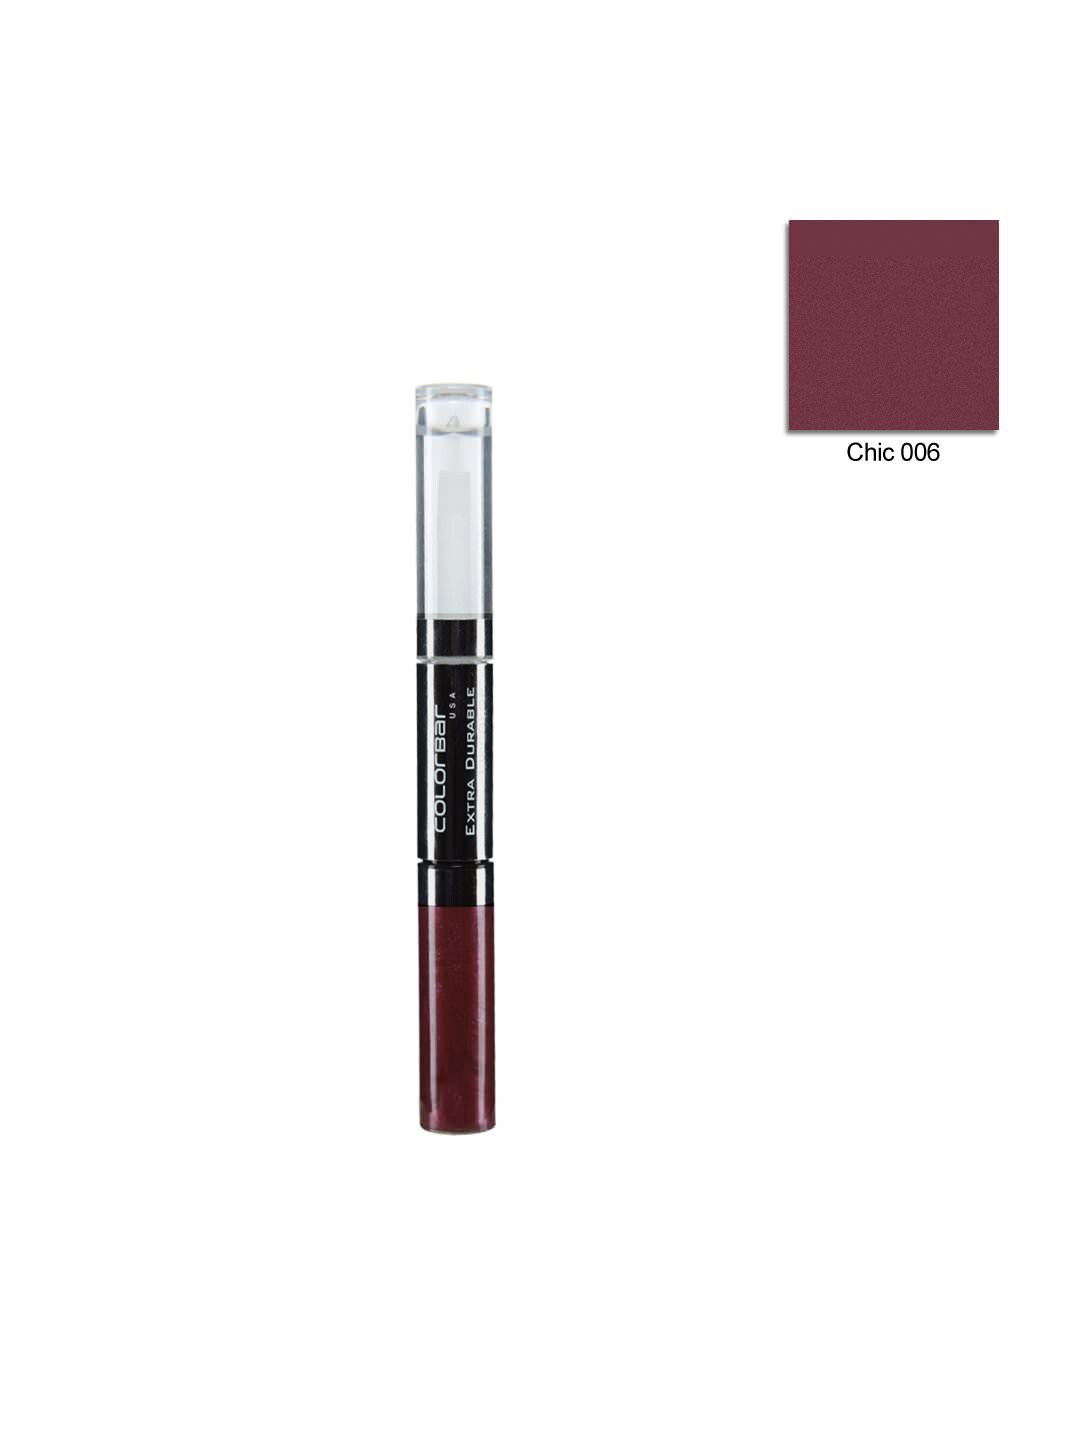 Colorbar Extra Durable Chic Lip Color 006